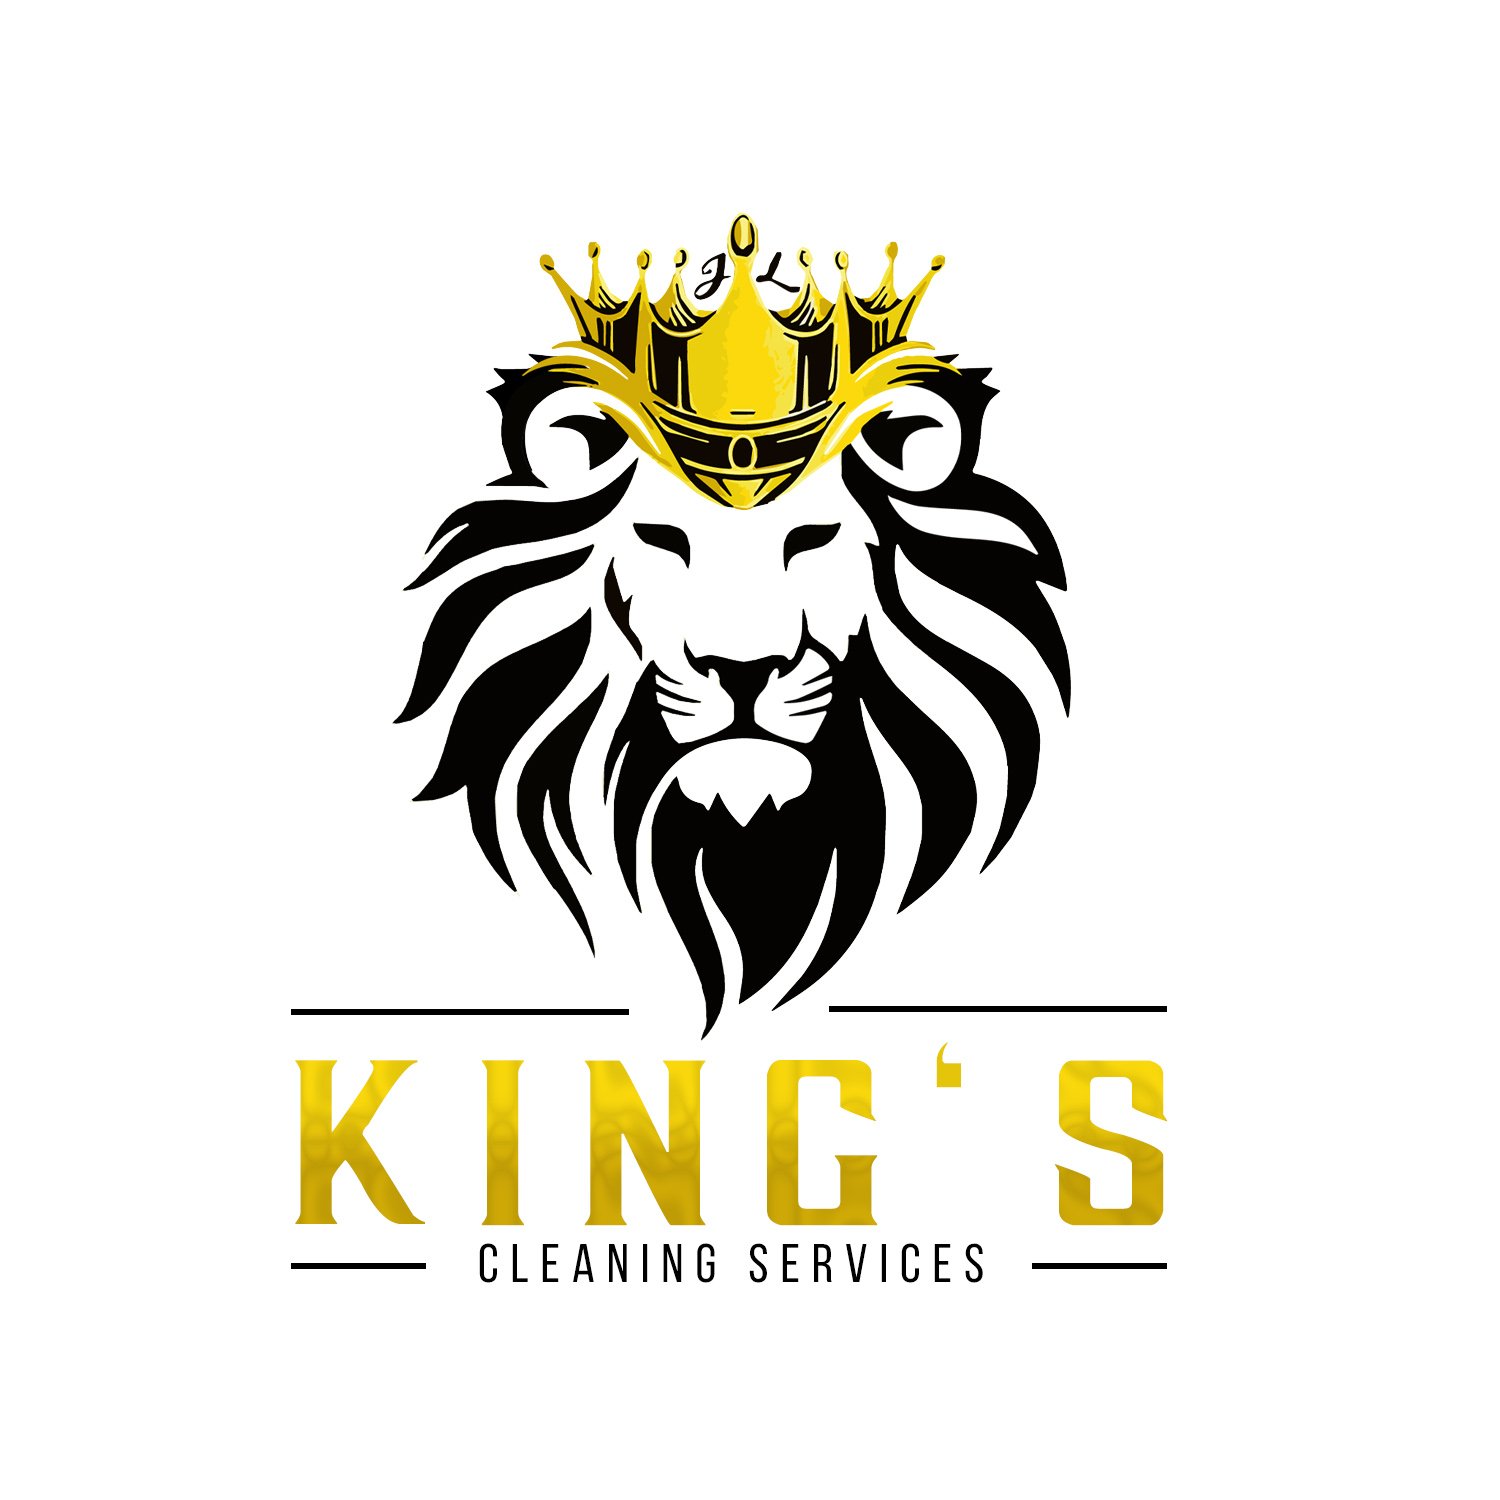 kings cleaning services logo4.jpg